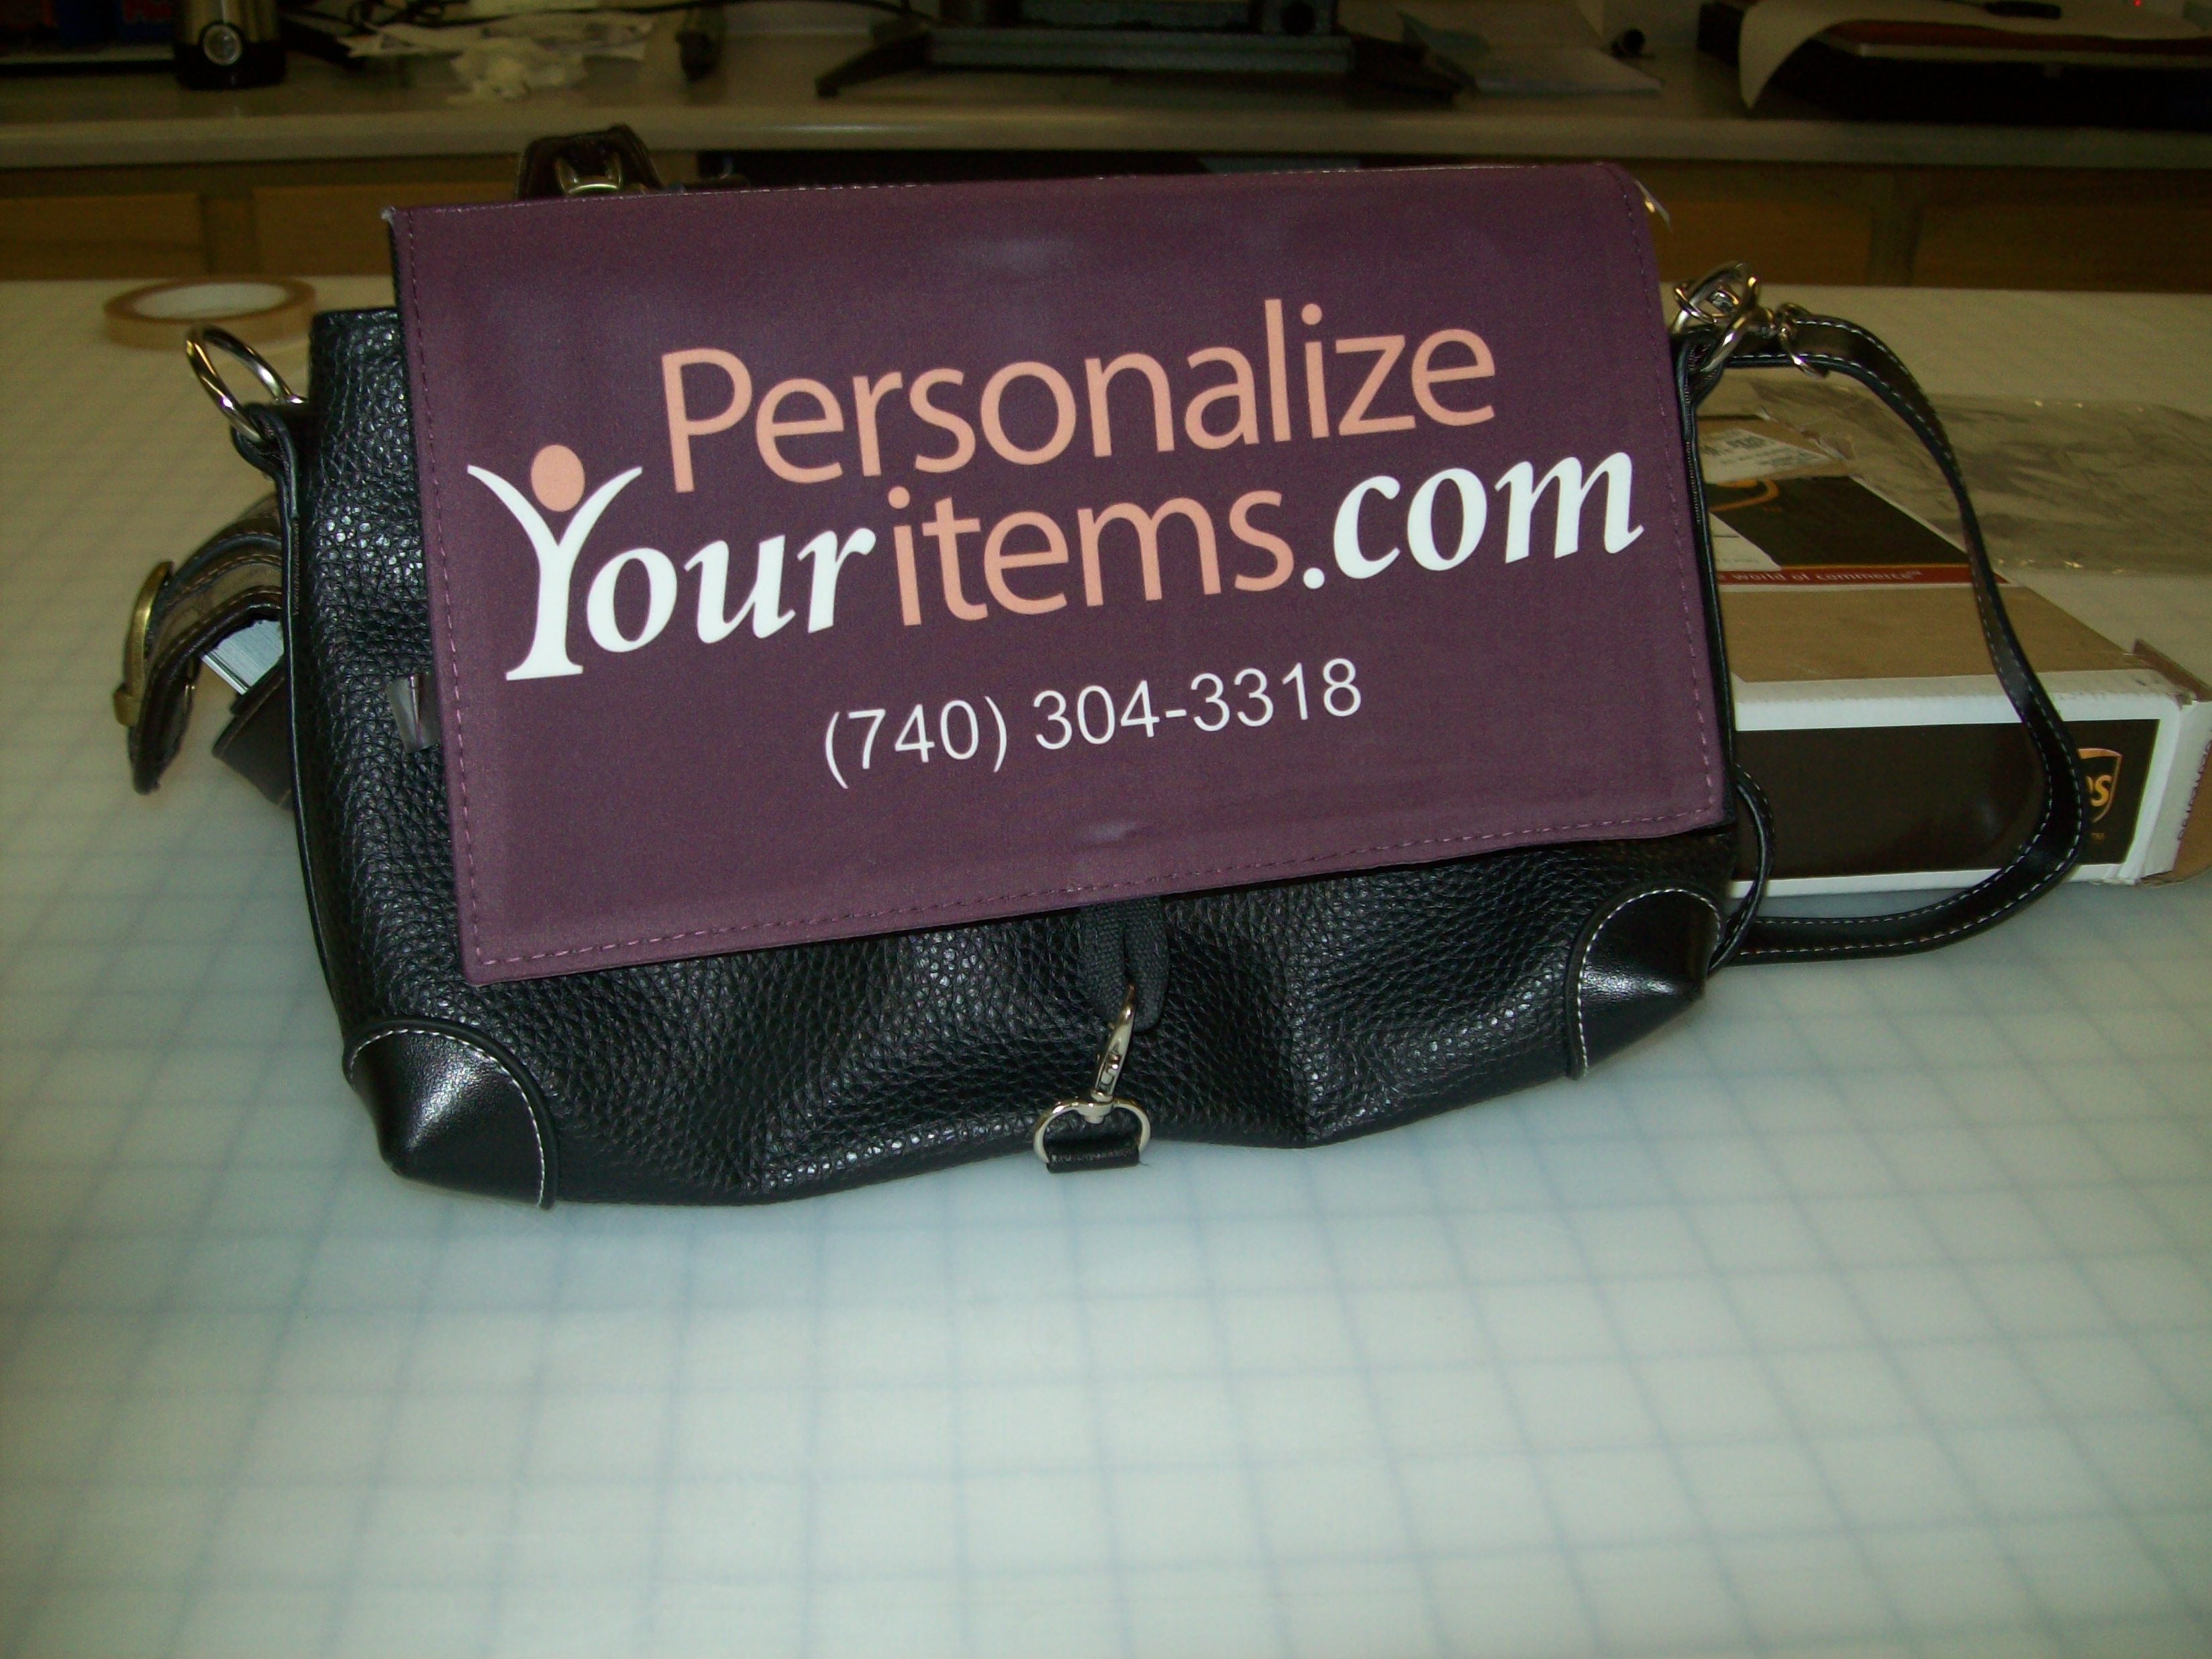 Personalized Purse made with sublimation printing